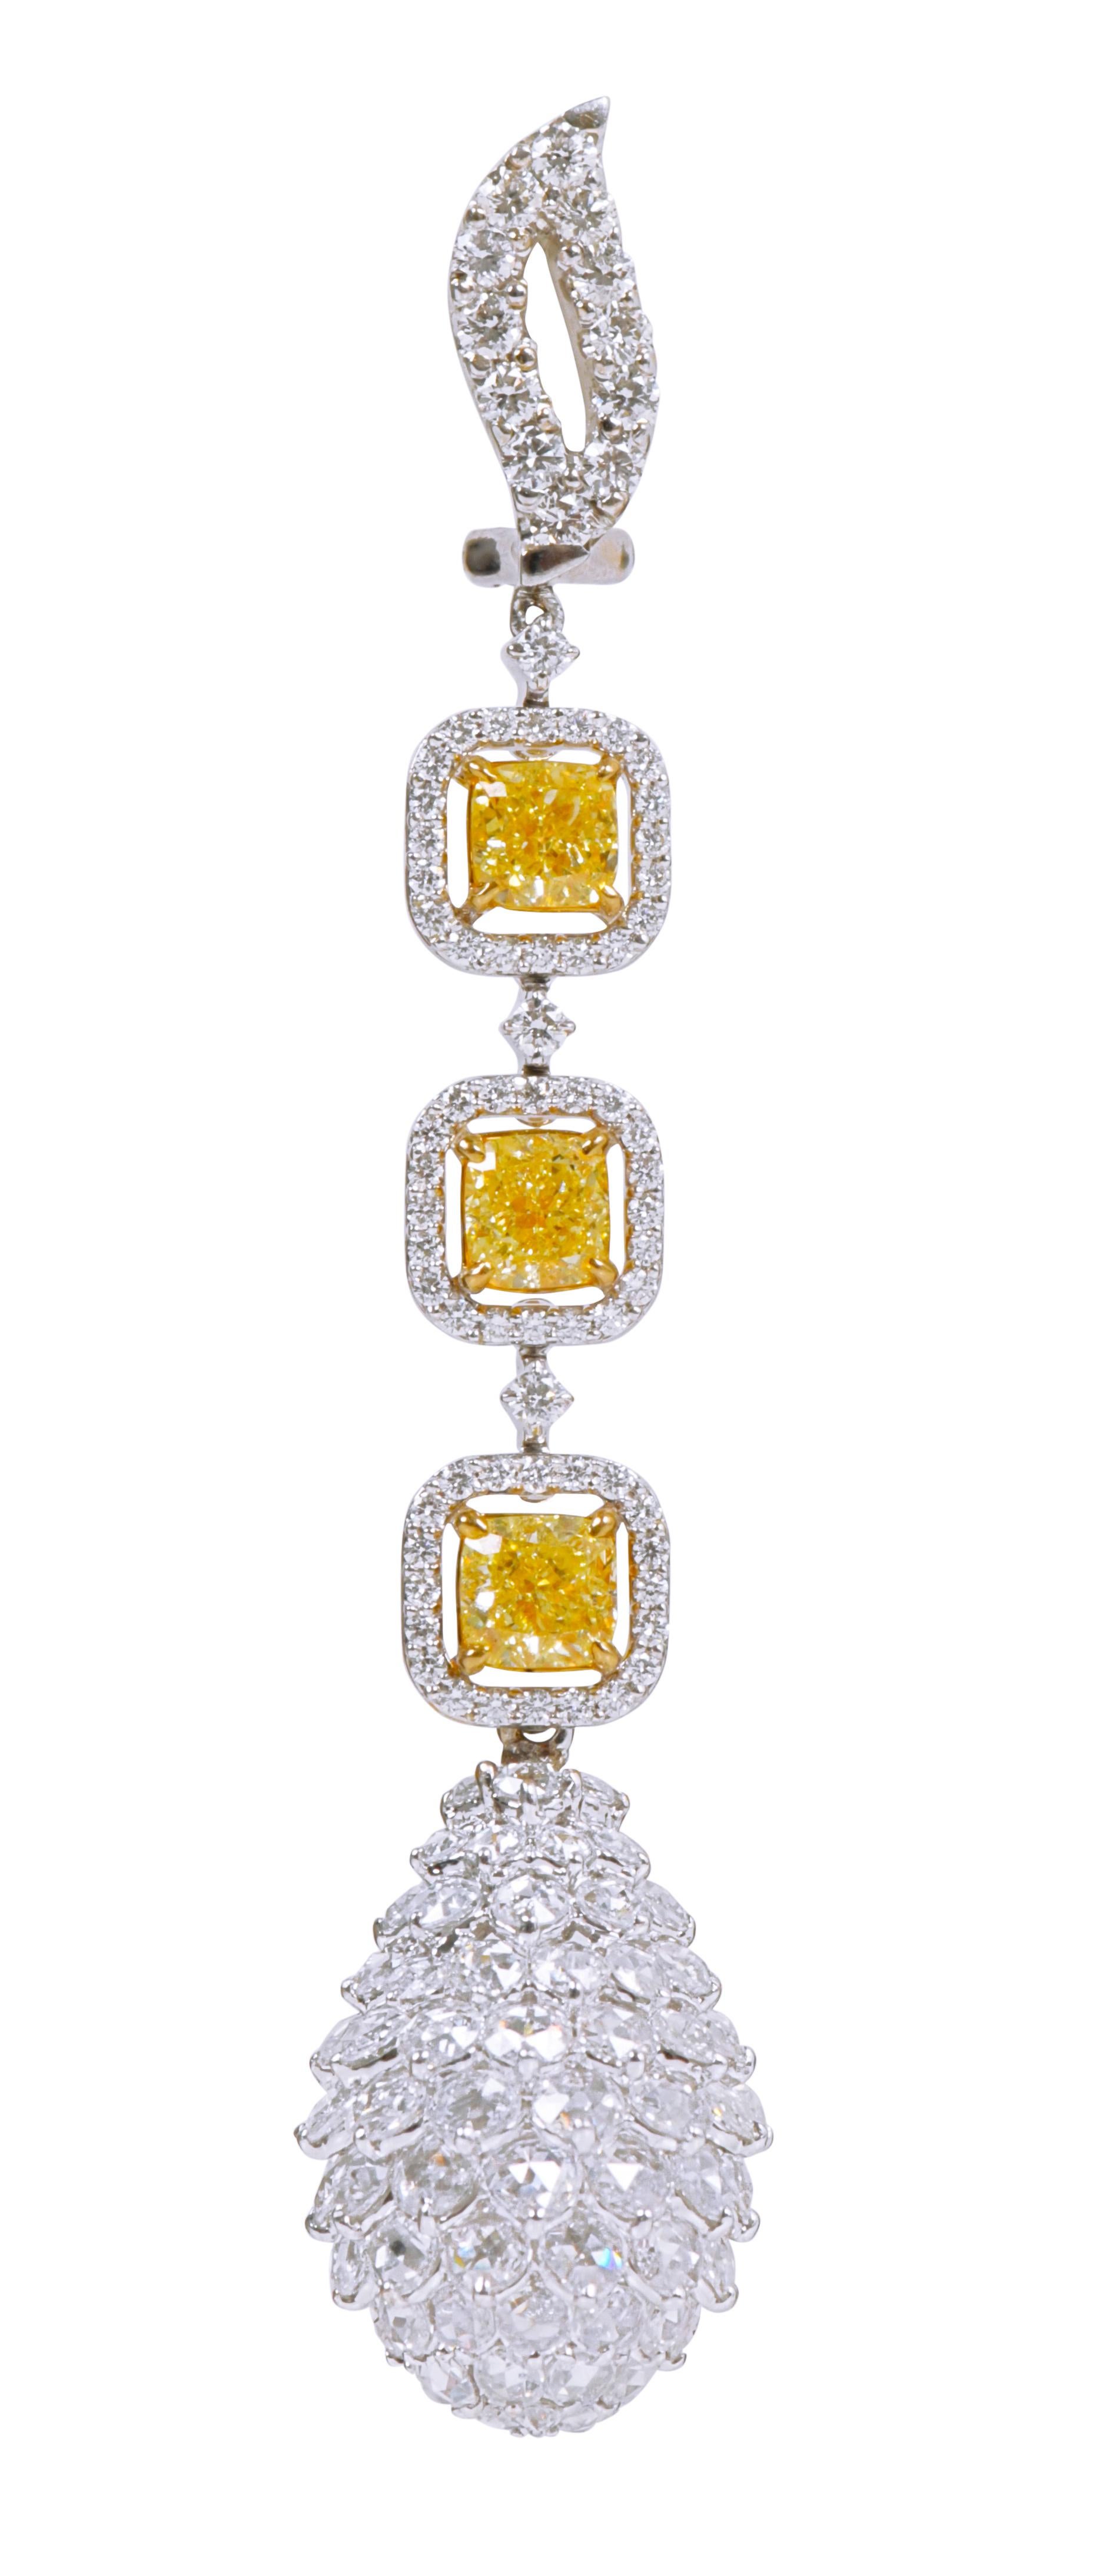 Contemporary 18 Karat Gold 15.72 Carat Yellow and White Diamond Pineapple Drop Earrings For Sale